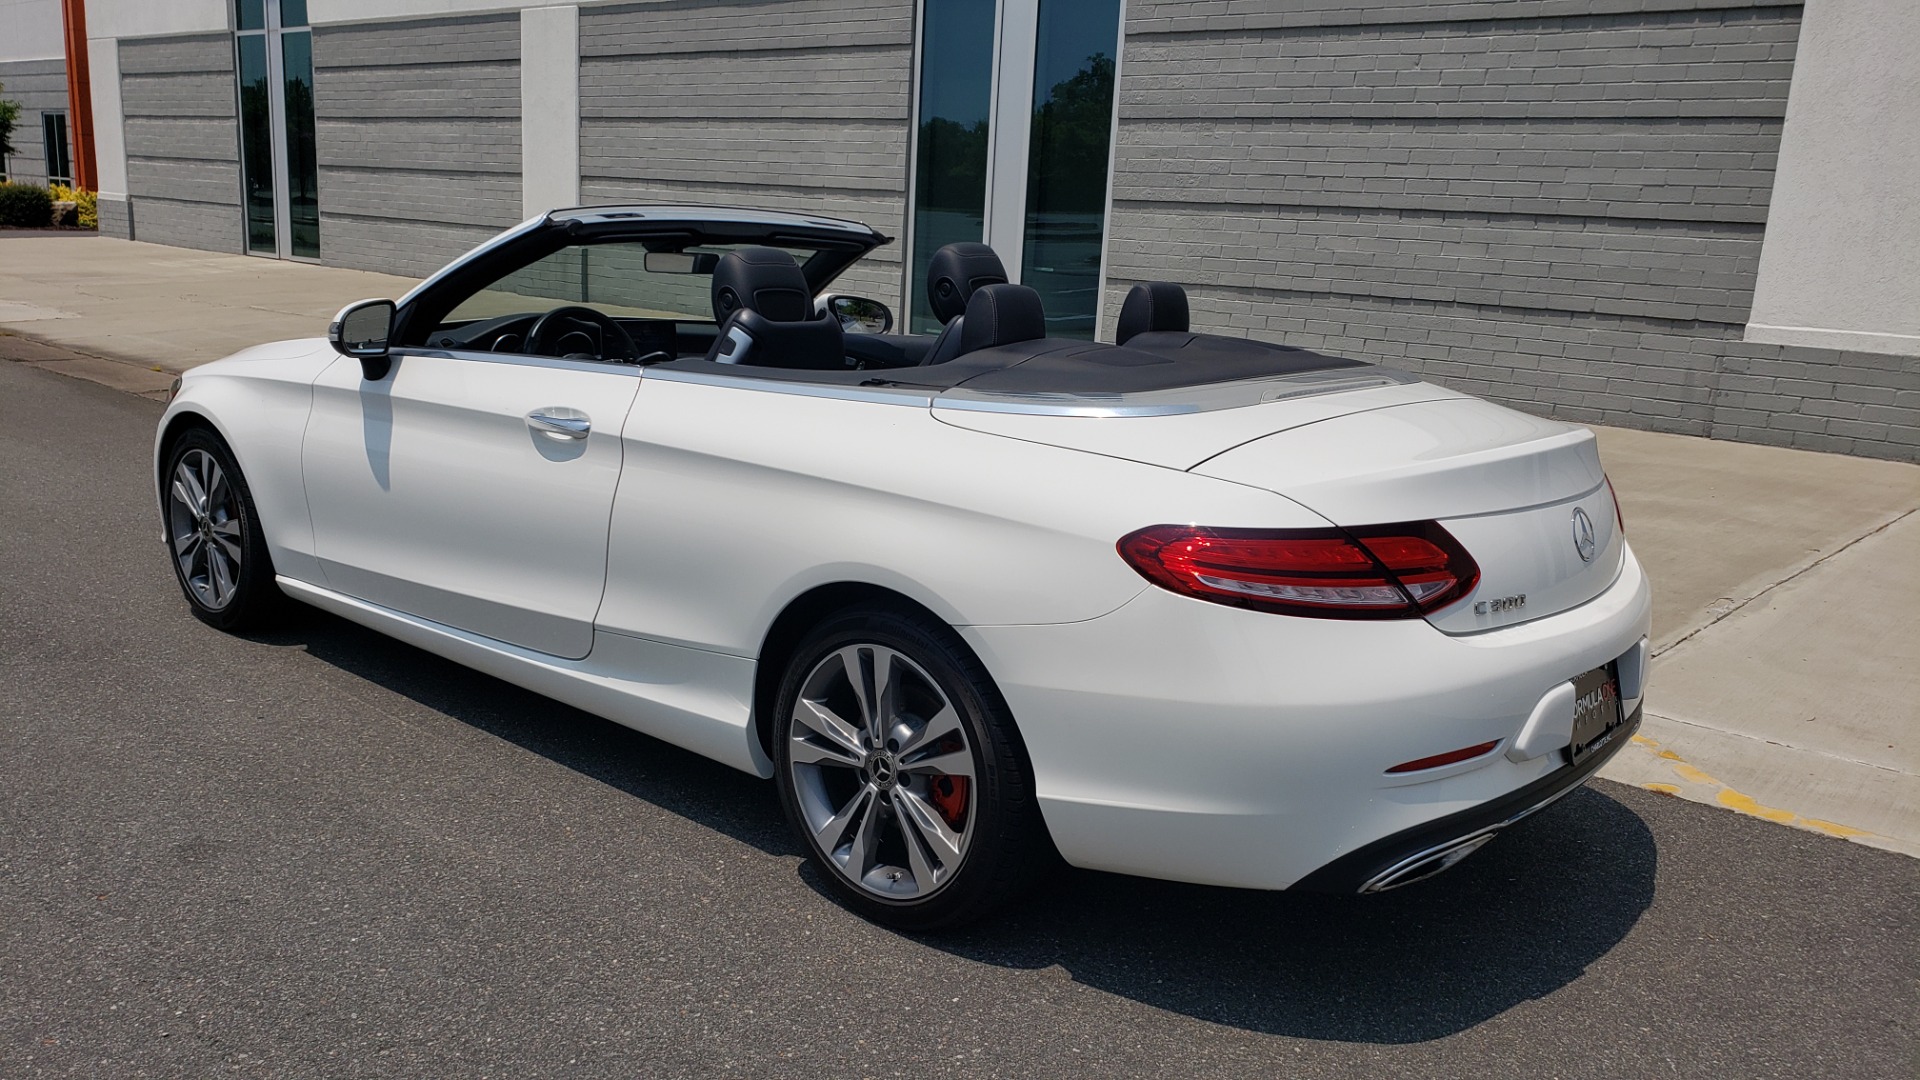 Used 2019 Mercedes-Benz C-CLASS C 300 CABRIOLET 2.0L / AUTO / NAV / HD RADIO / REARVIEW for sale Sold at Formula Imports in Charlotte NC 28227 14